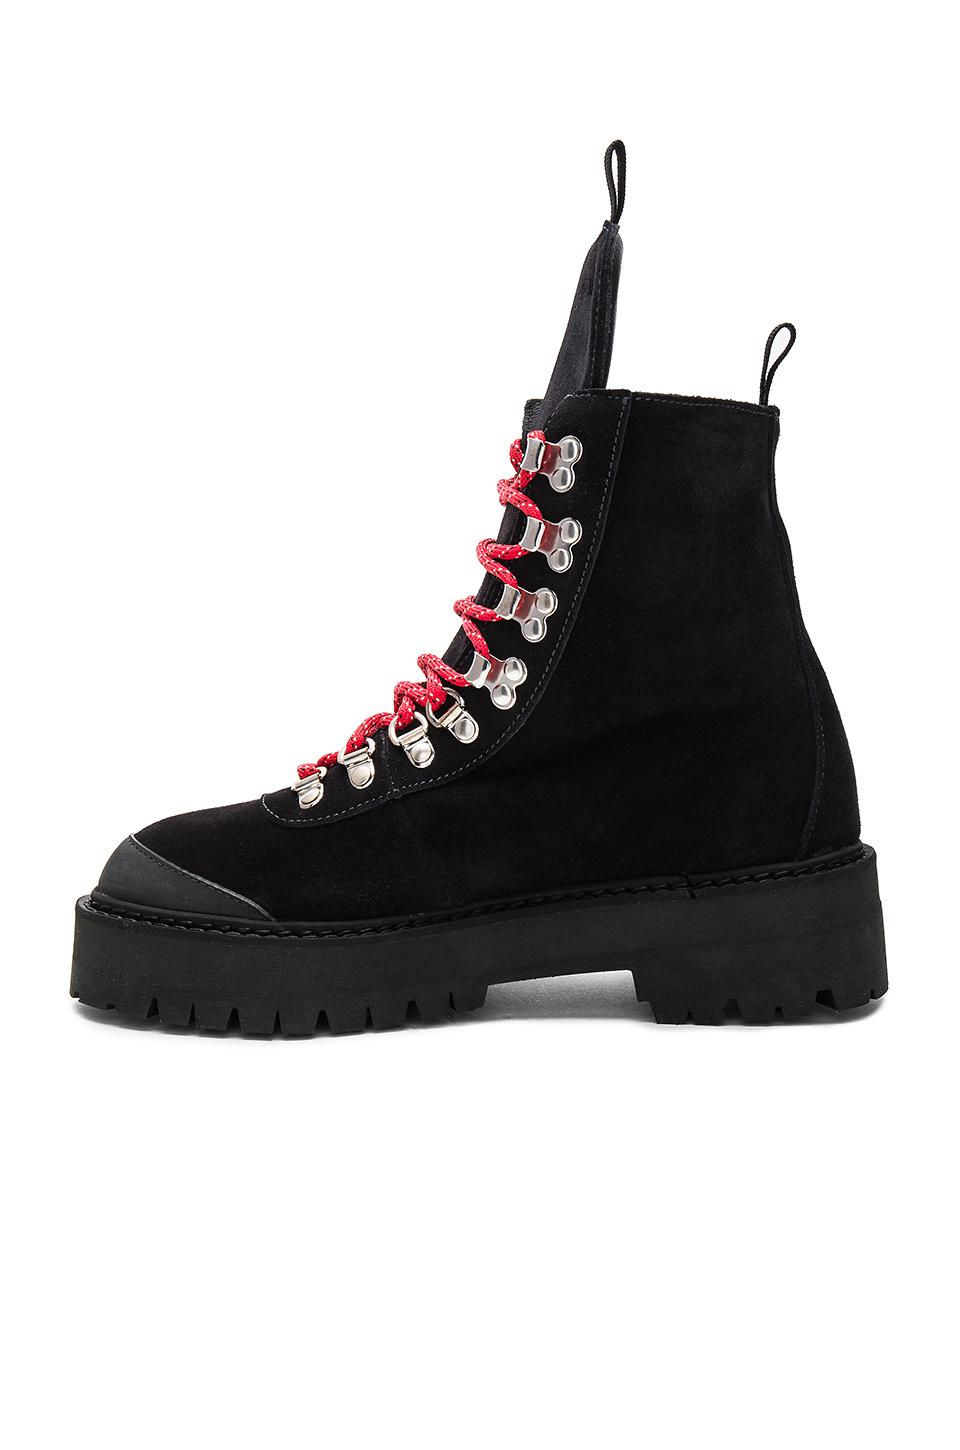 Off-White c/o Virgil Abloh Hiking Mountain Boots in Black | Lyst